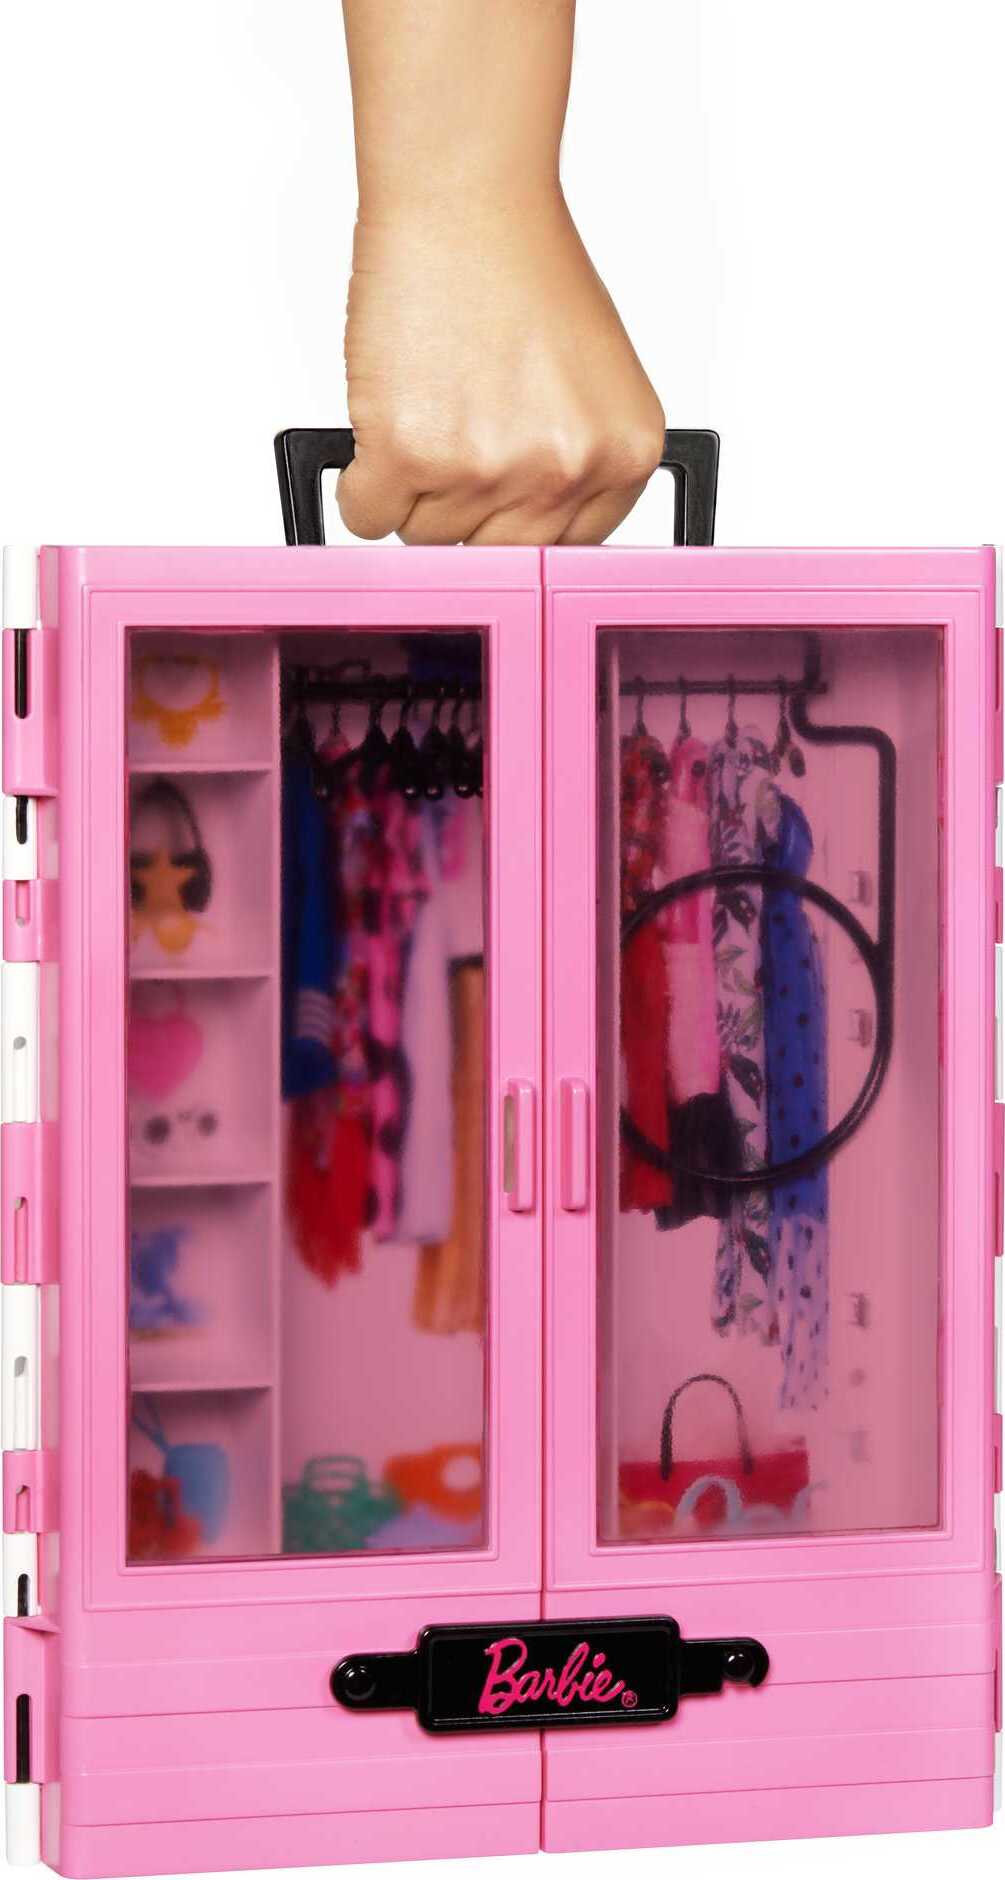 Barbie Fashionista Ultimate Closet Playset with Clothes & Accessories, Includes 5 Hangers - image 3 of 6